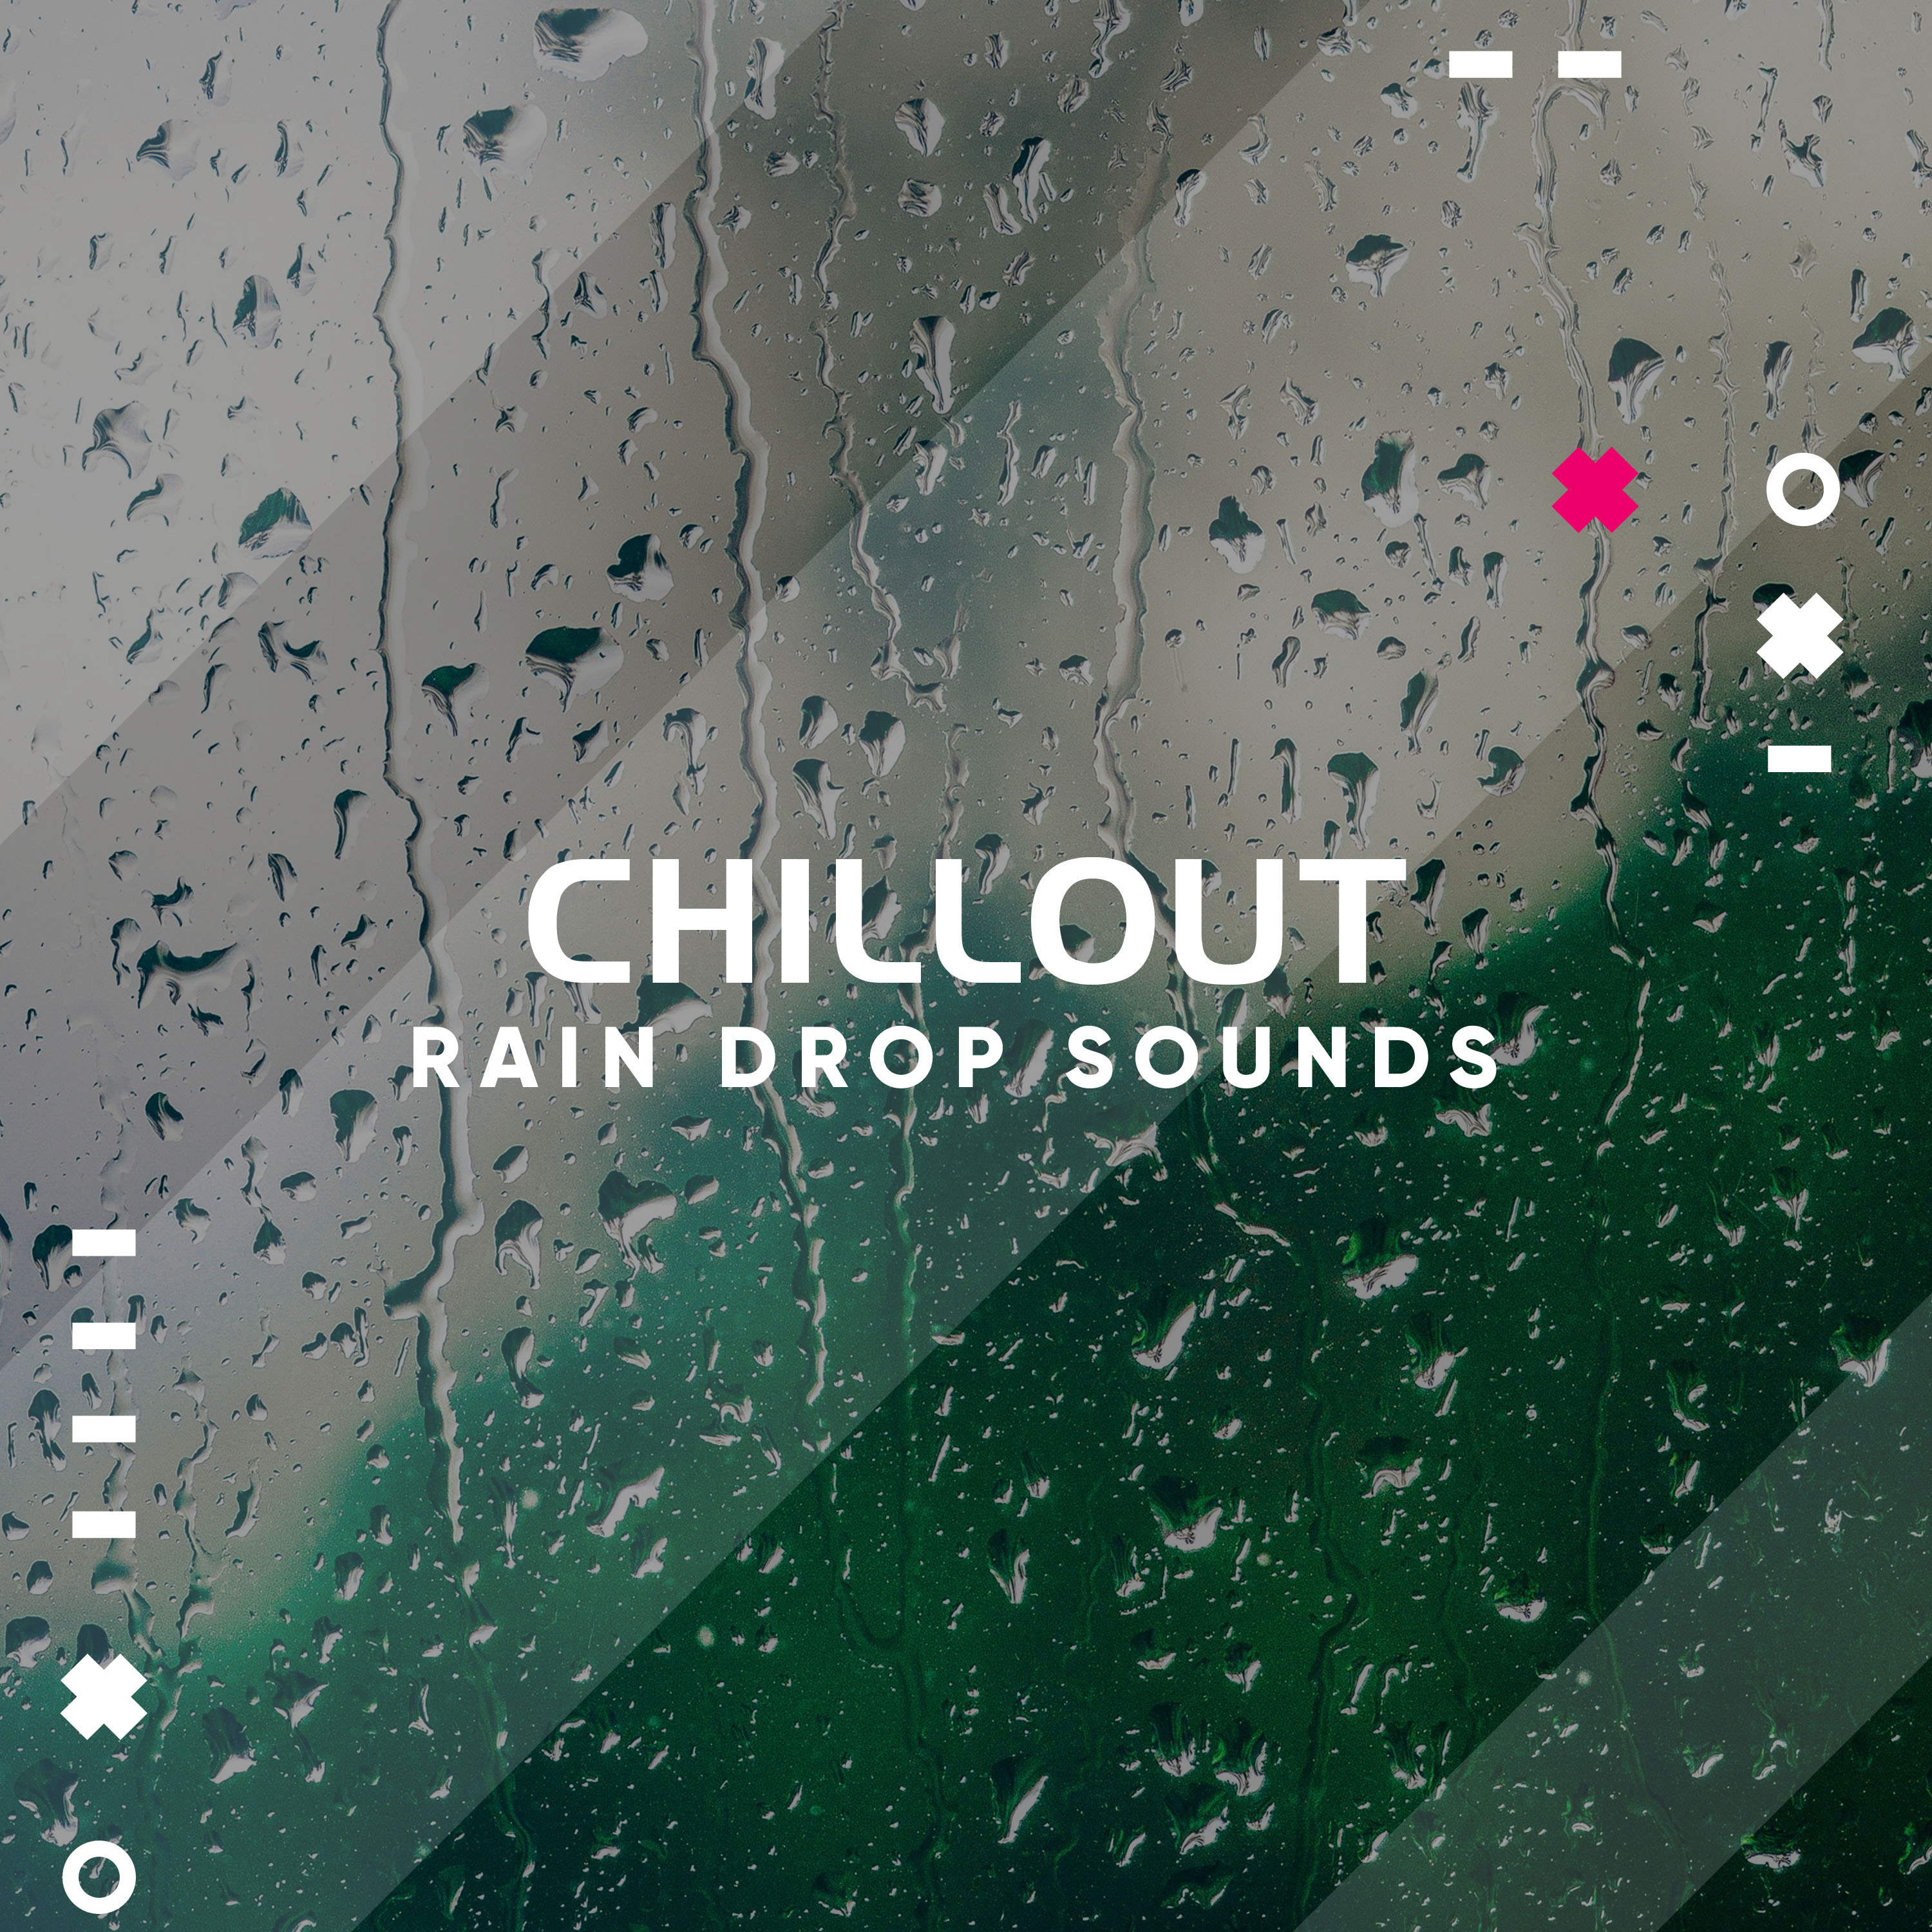 #15 Chillout Rain Drop Sounds from Mother Nature